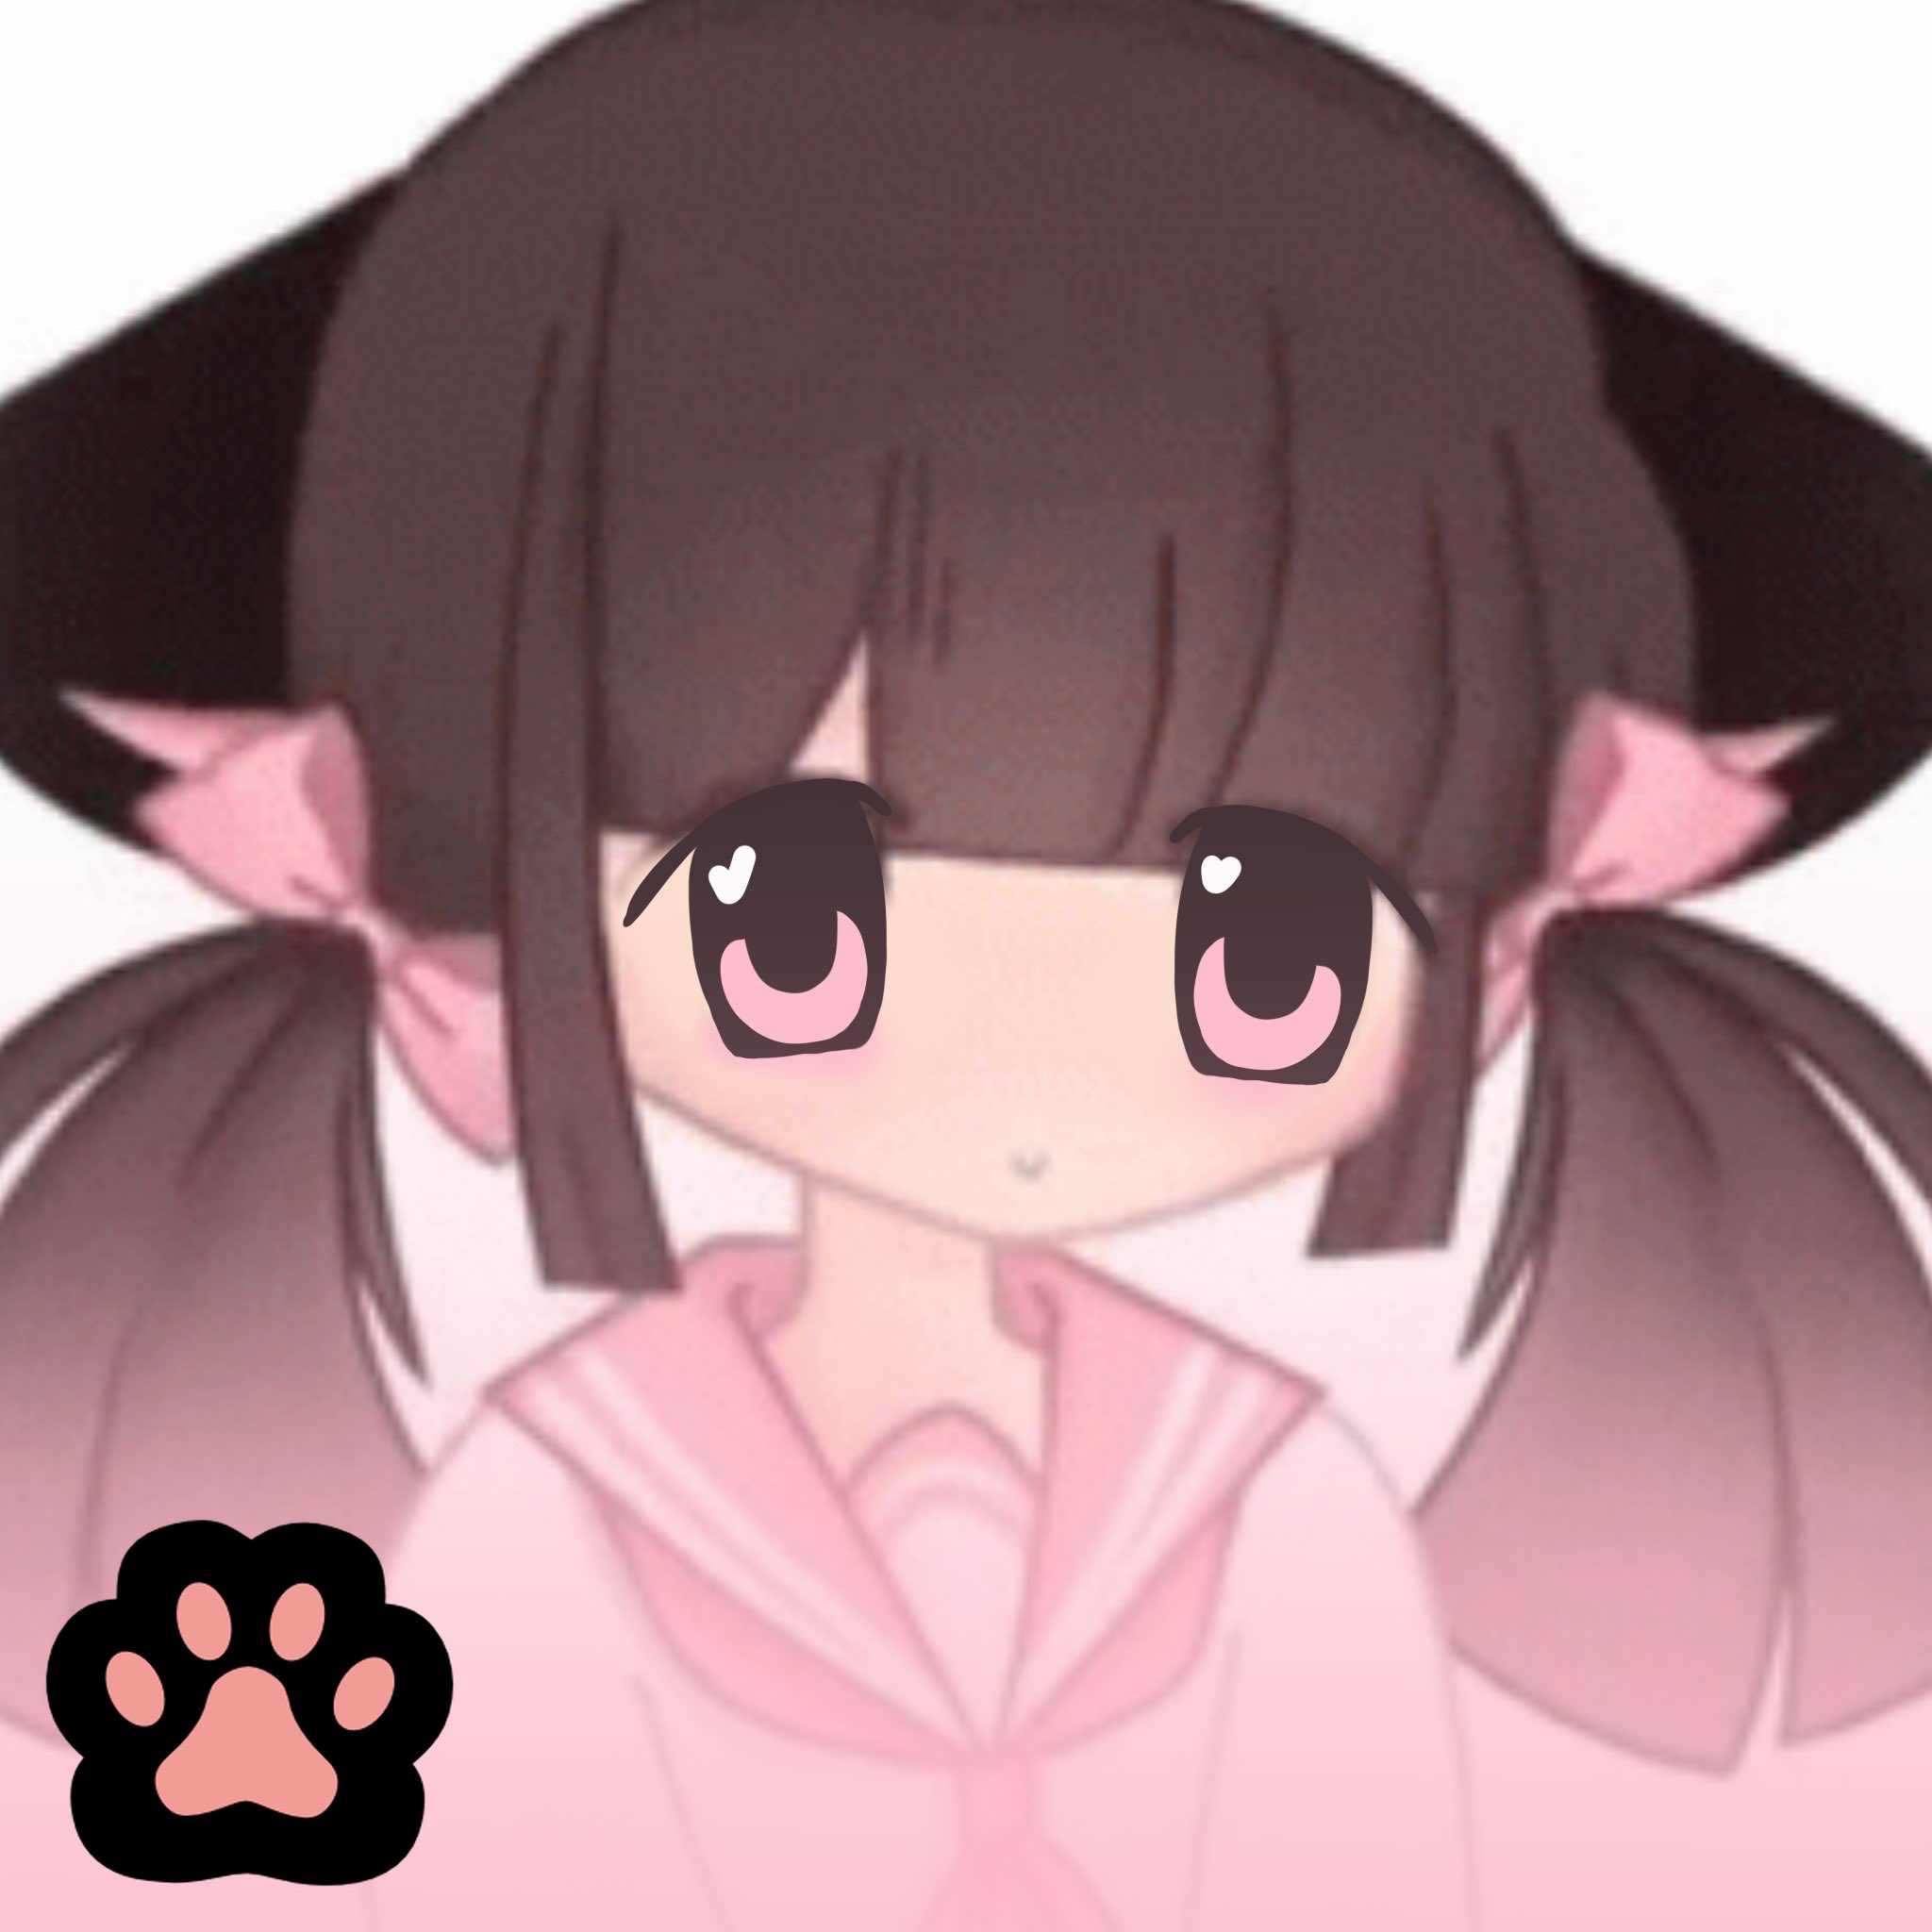 kuri~UwU on X: I dunno if this counts as a edit but I made it